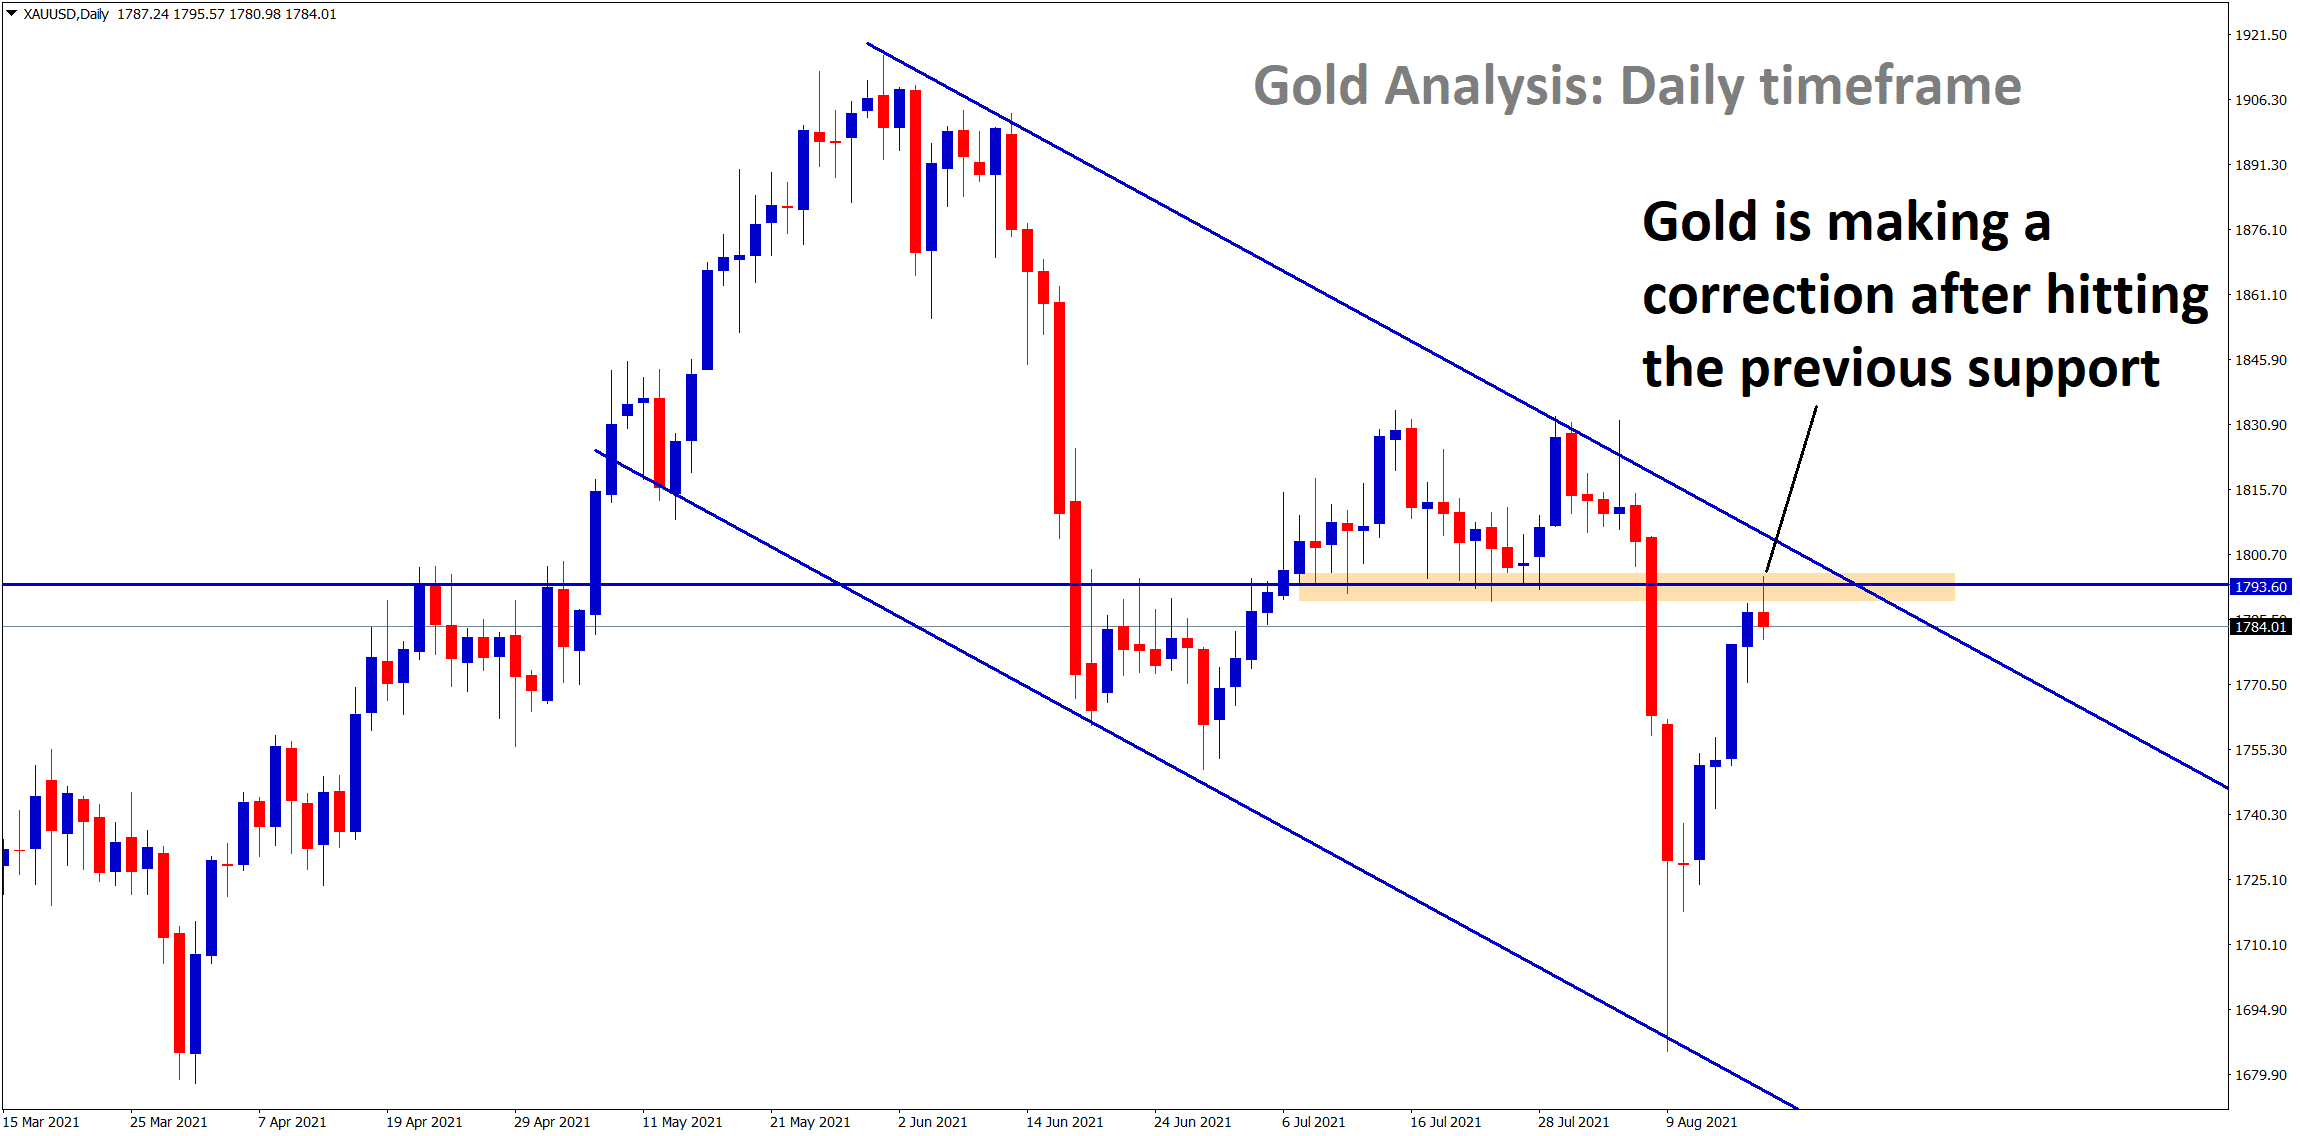 Gold is making a correction after hitting the previous support level overall gold is near to the lower high of the descending channel